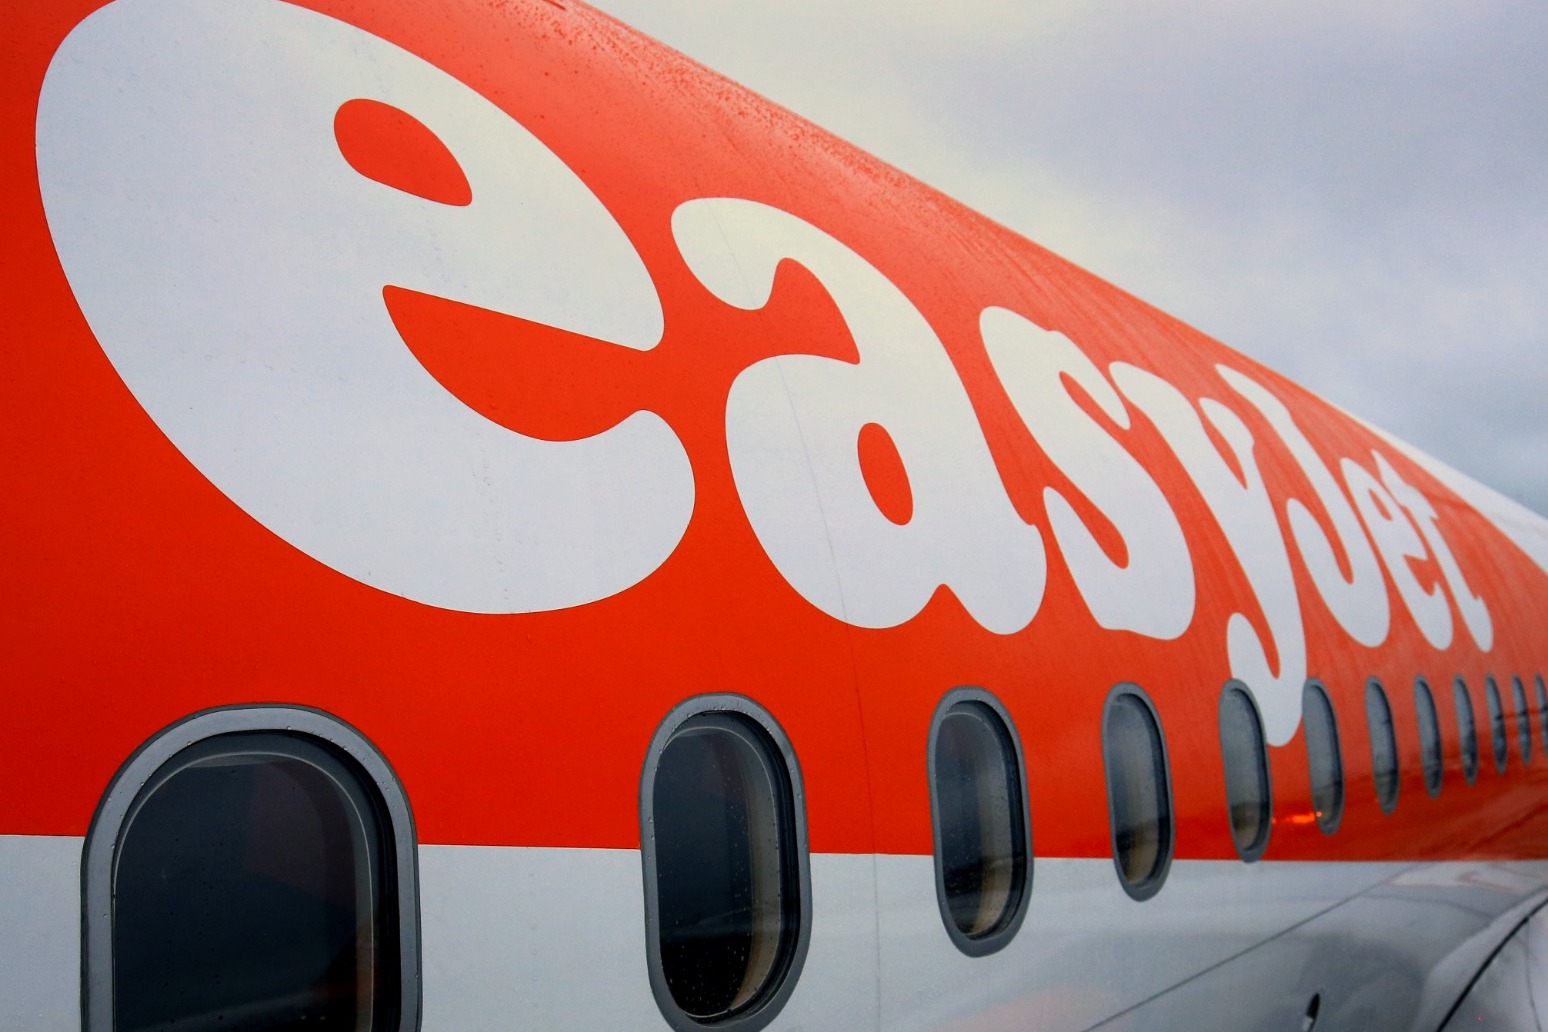 EasyJet ‘can’t guarantee’ smooth experience for summer passengers 